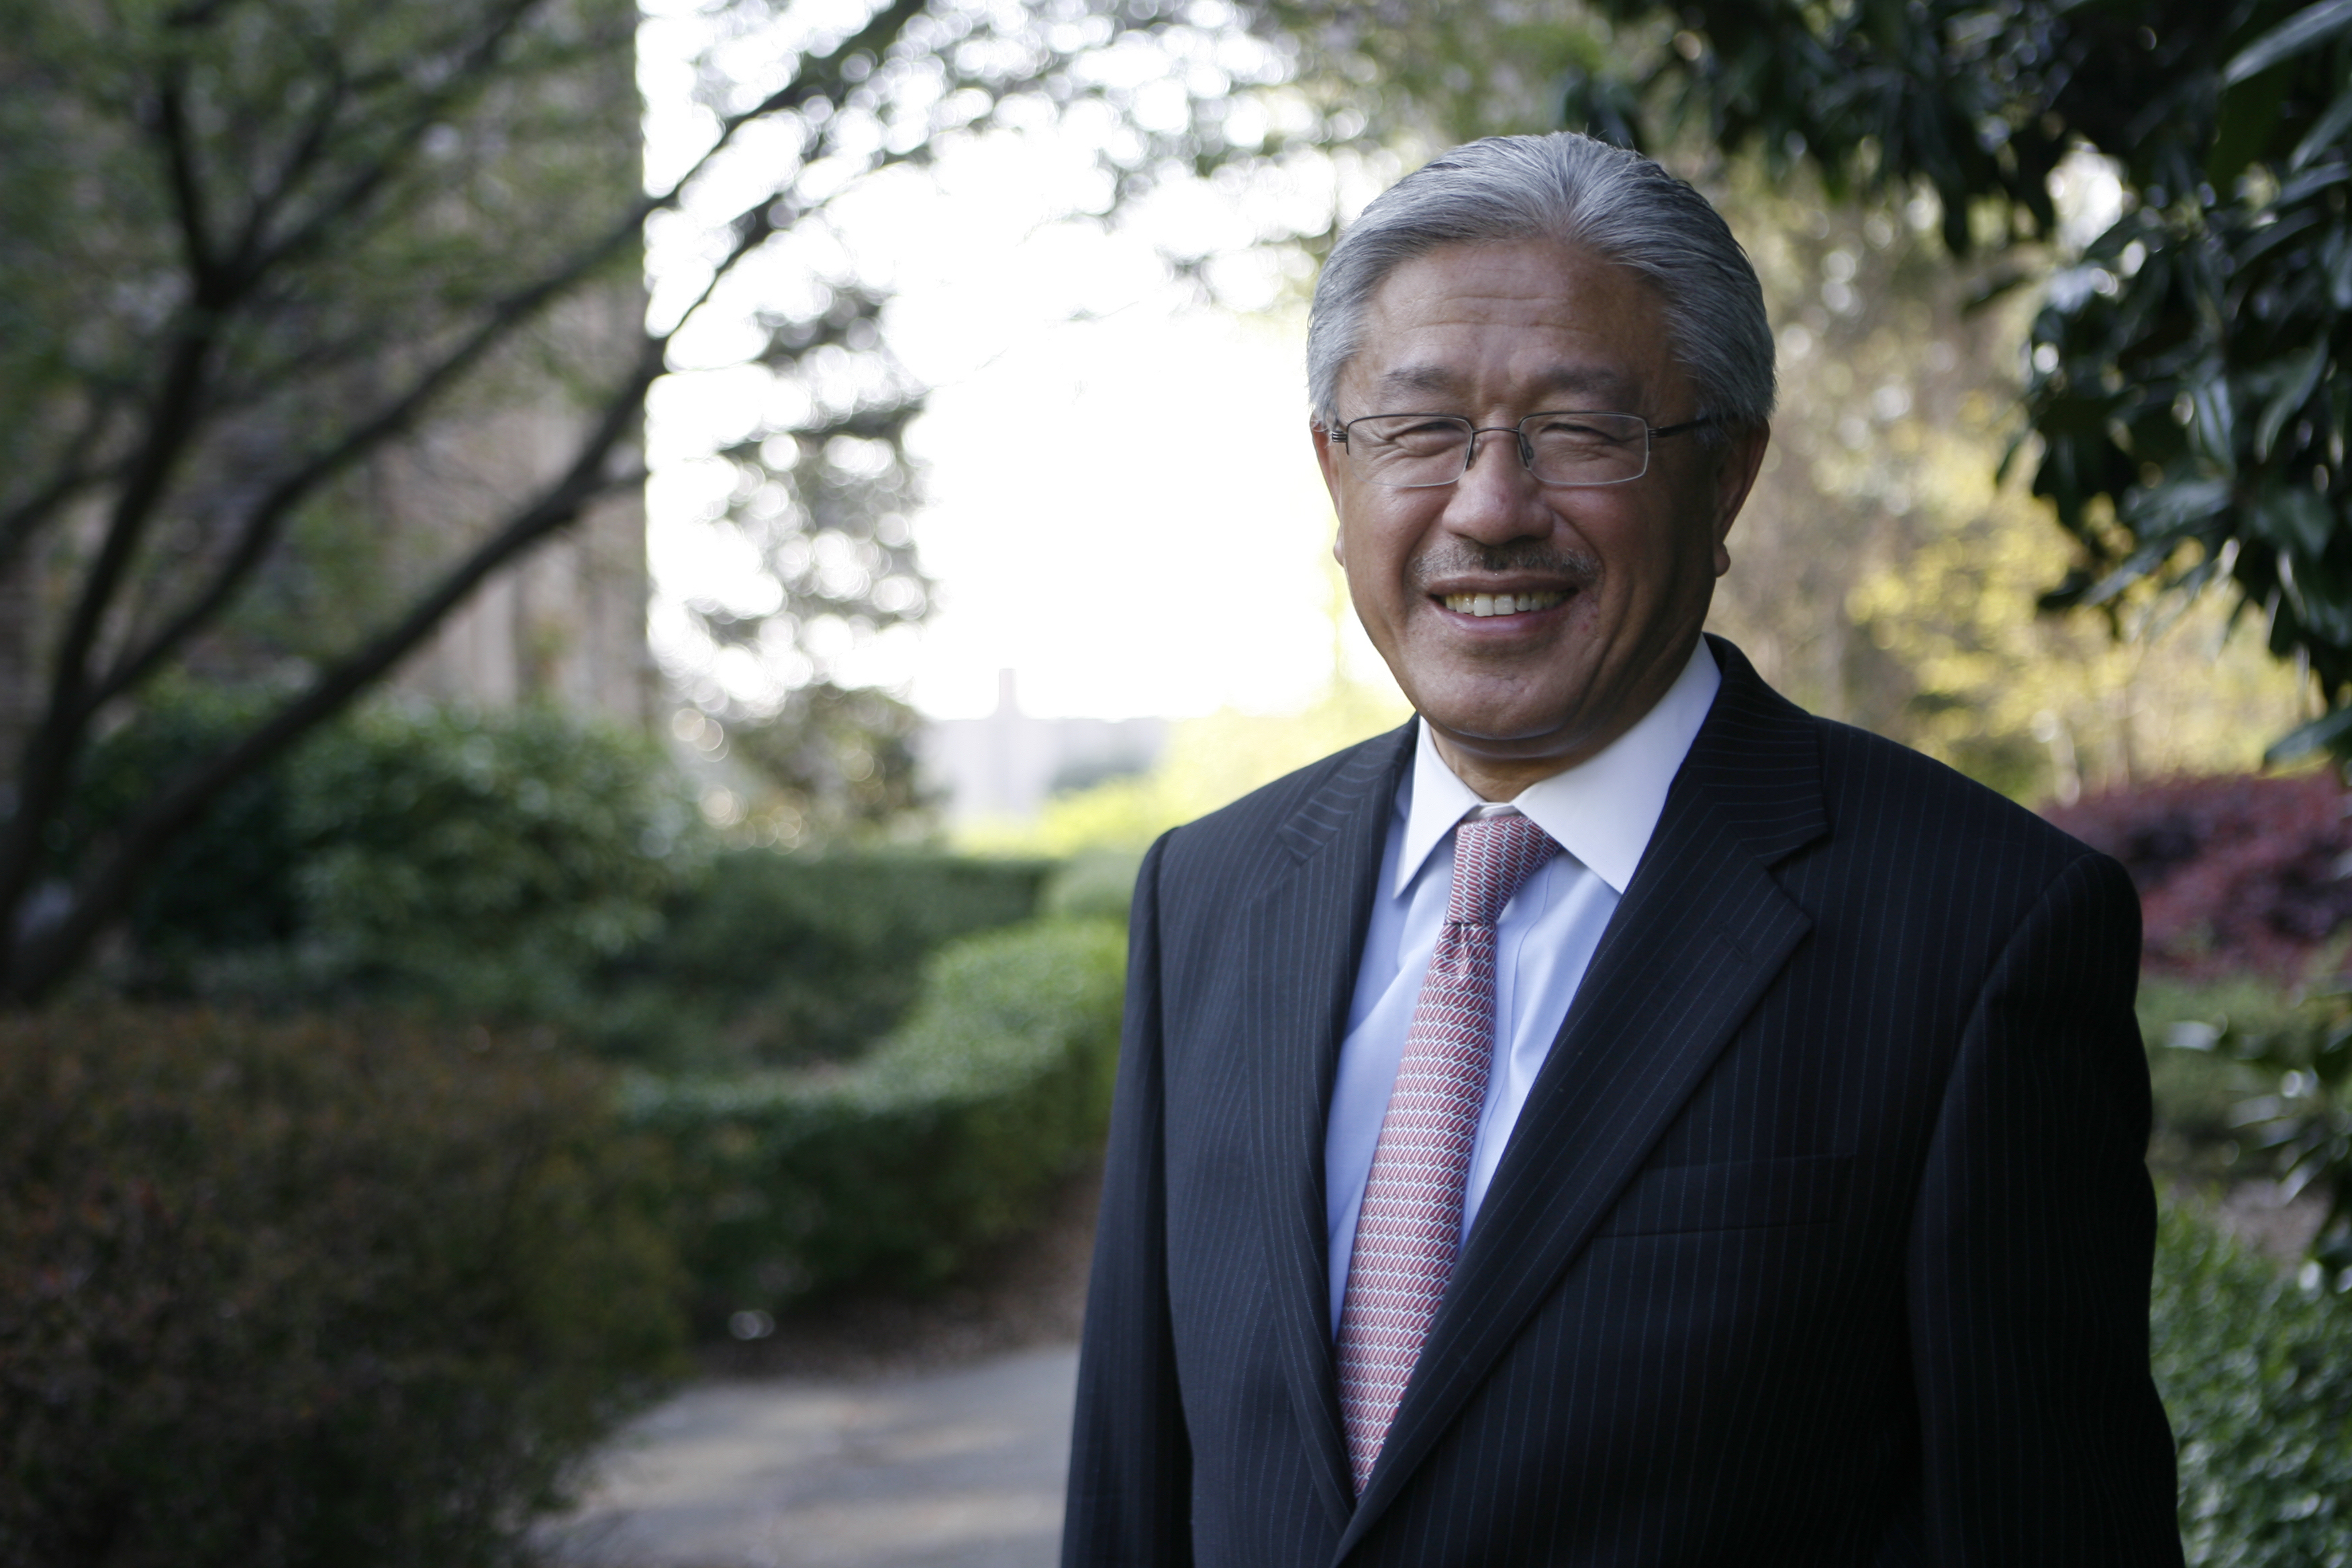 Dr. Victor Dzau, CEO of Duke University Health System and Incoming President of the Institute of Medicine